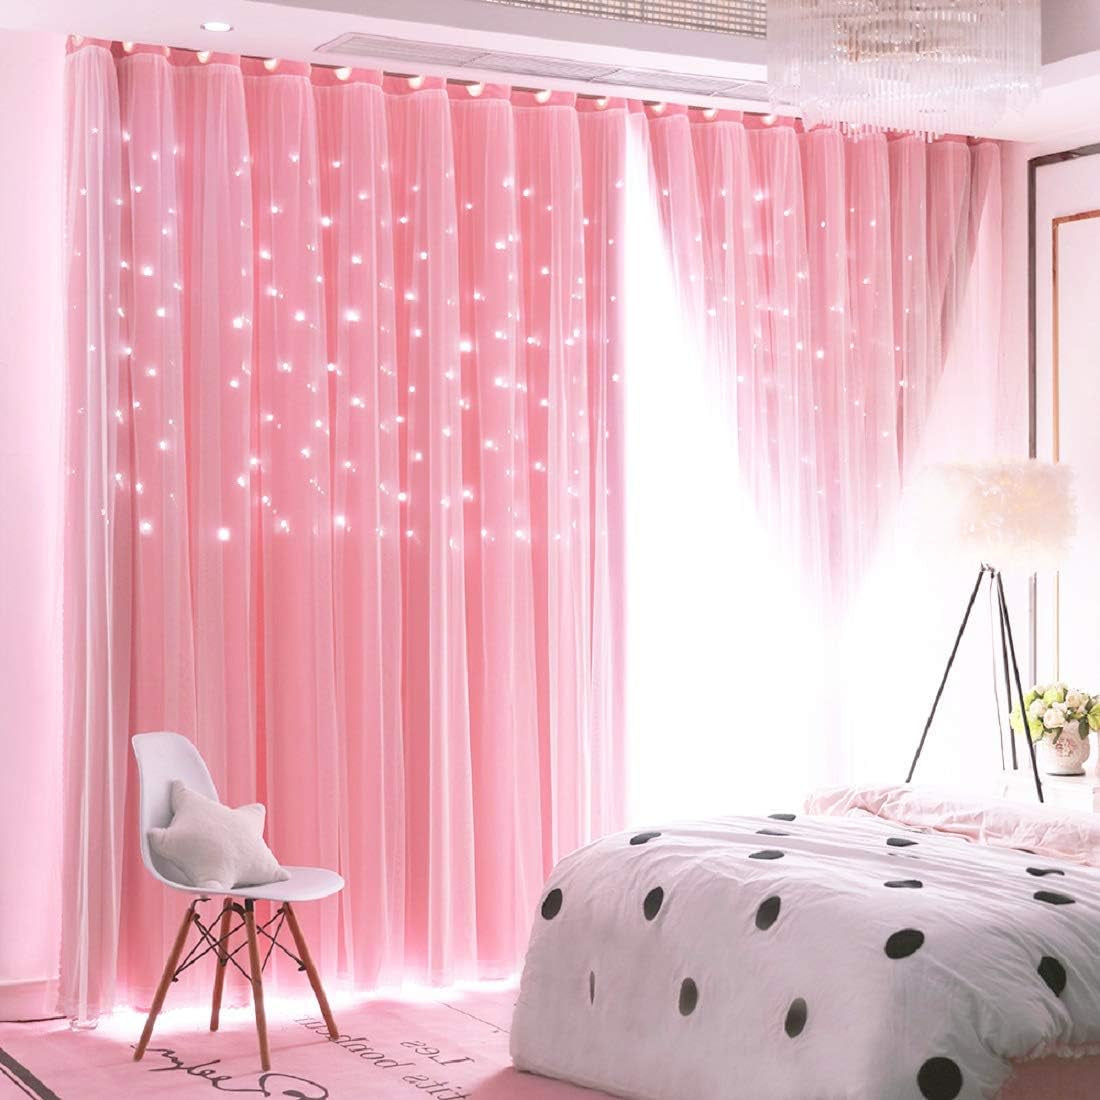 UNISTAR 2 Panels Stars Blackout Curtains for Bedroom Girls Kids Baby Window Decoration Double Layer Star Cut Out Aesthetic Living Room Decor Wall Home Curtain,W52 X L63 Inches,Pink  UNISTAR 2Panels丨Double-Layer,Pink 63.00" X 42.00" 